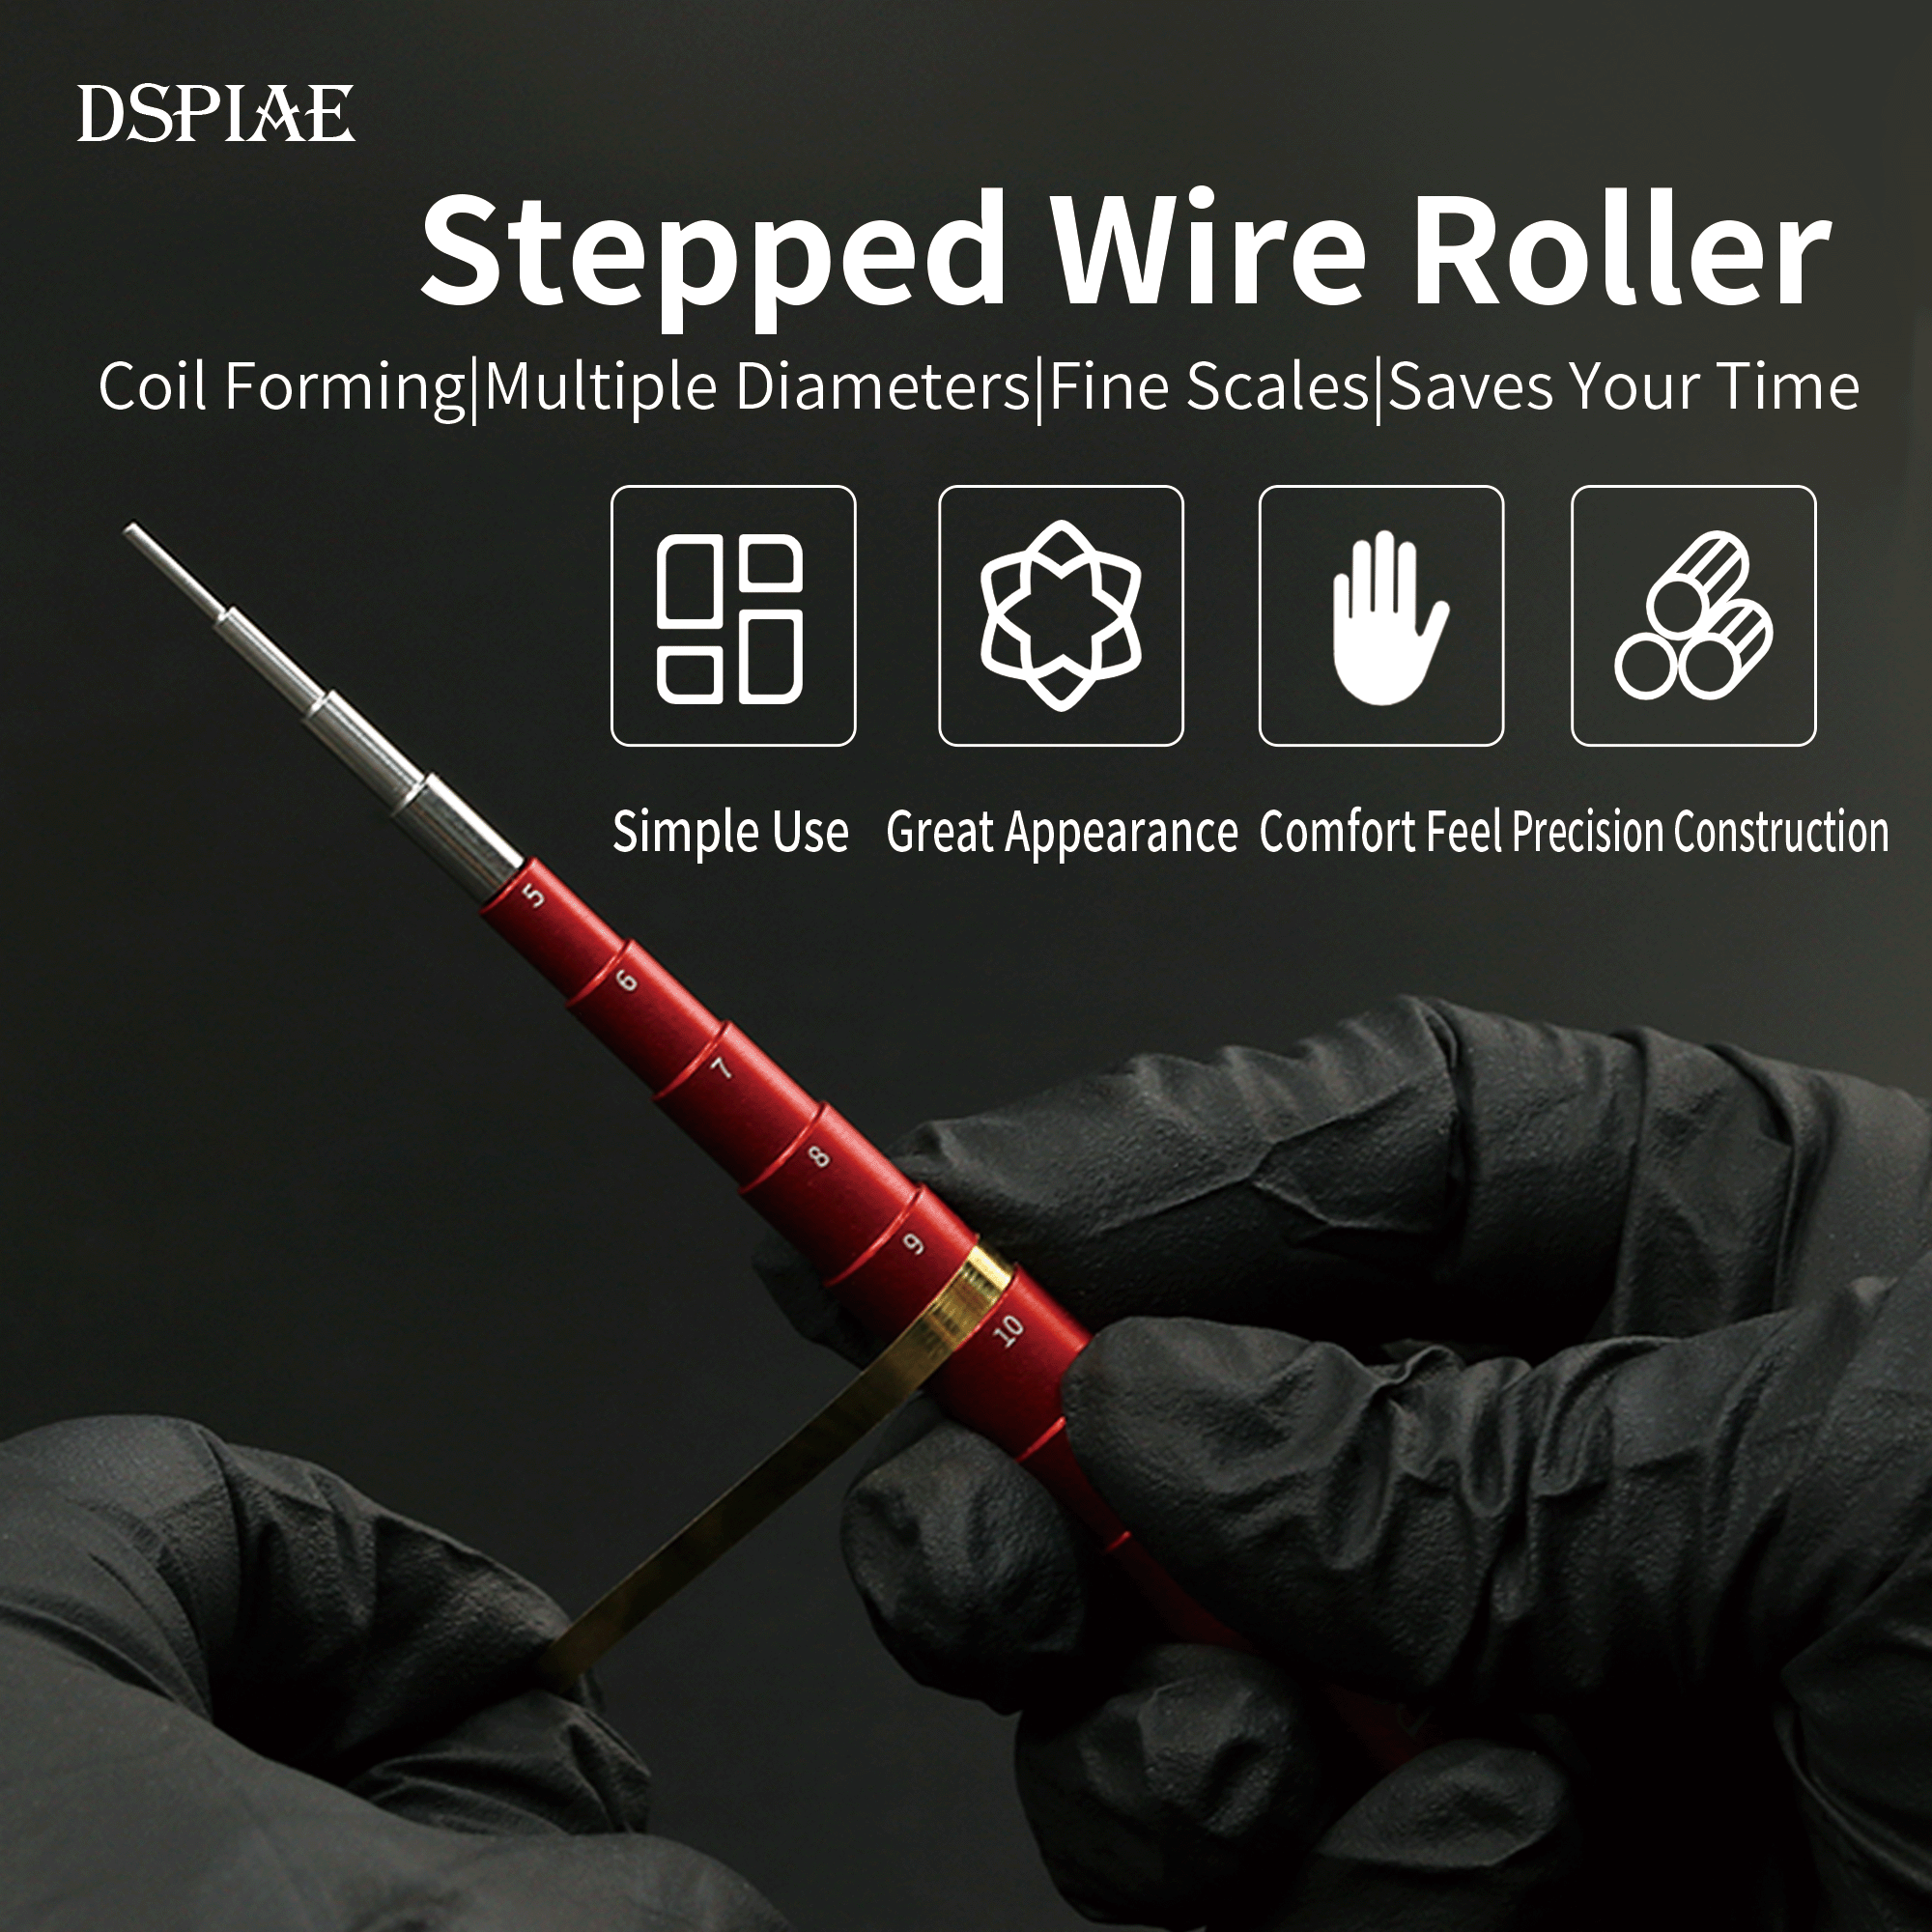 DSPIAE AT-CR Stepped Wire Roller